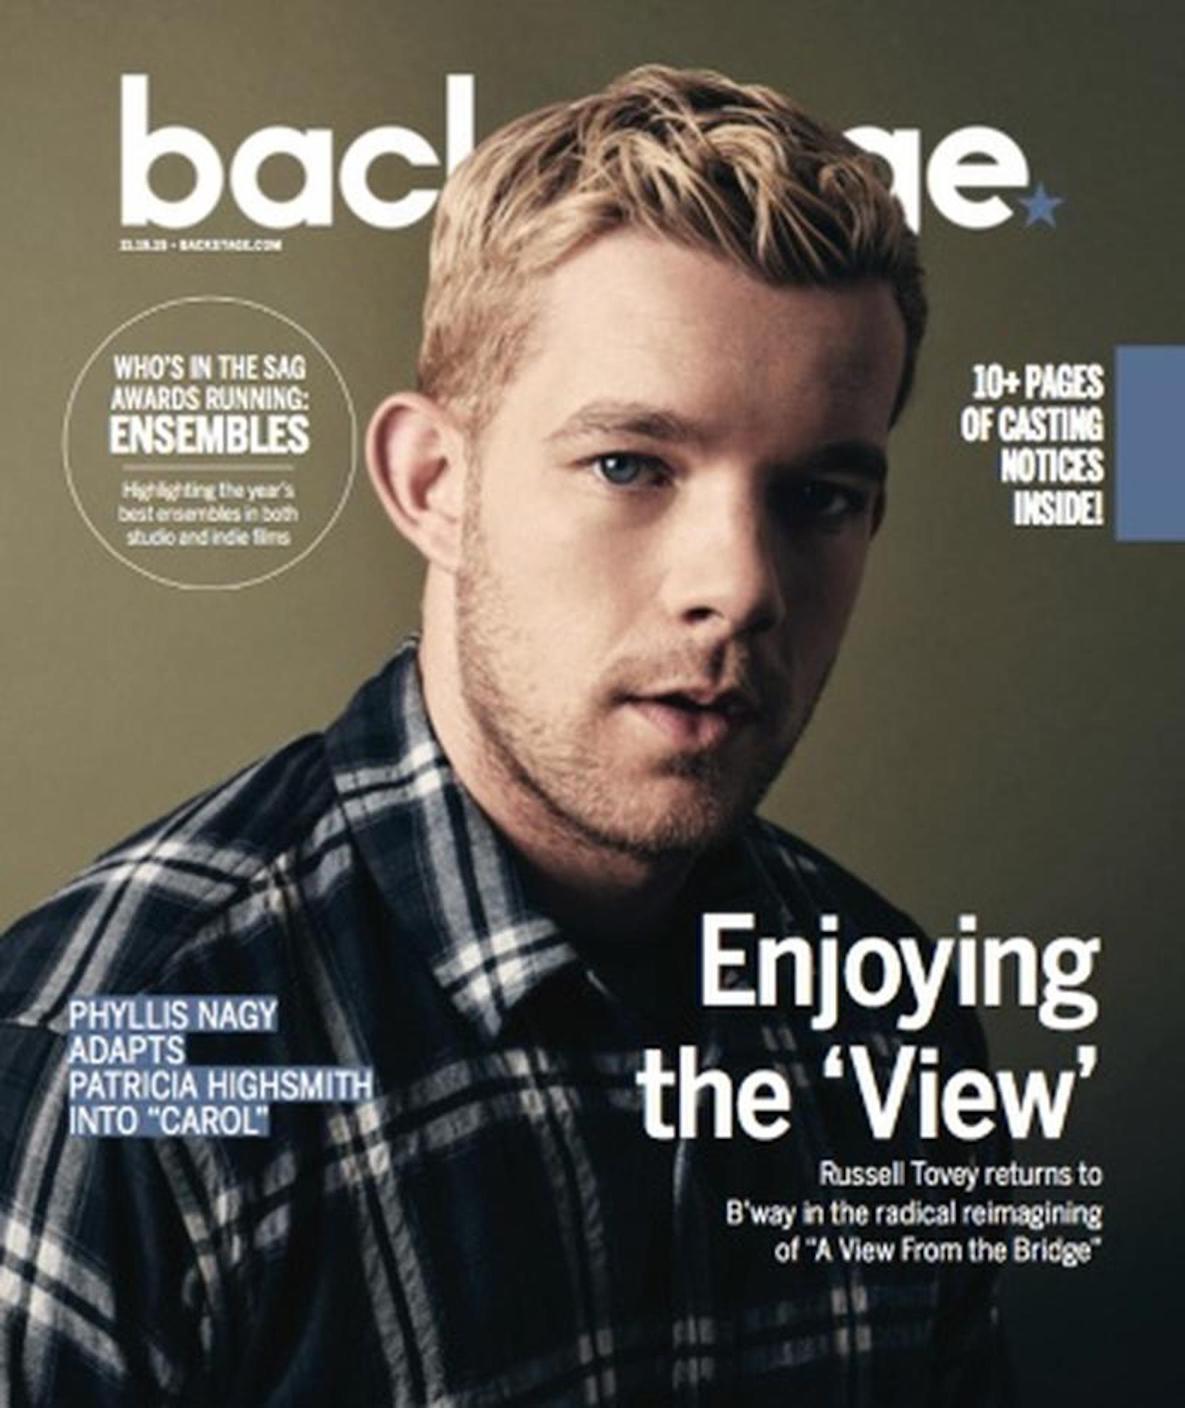 Russell Tovey Juggles B'way and 'Looking'